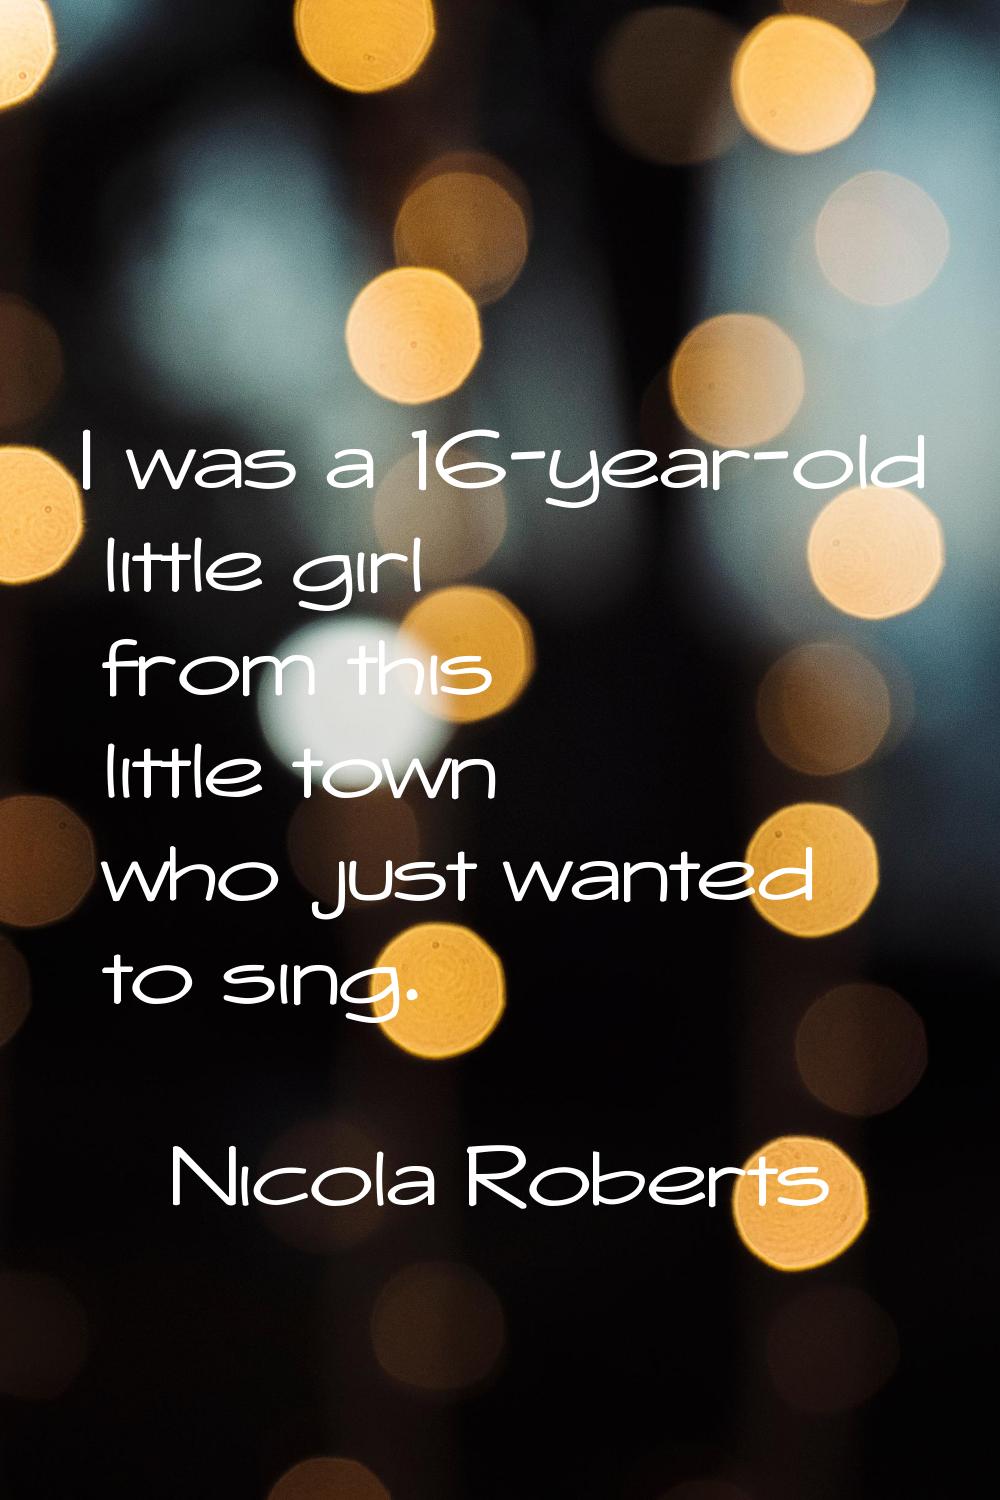 I was a 16-year-old little girl from this little town who just wanted to sing.